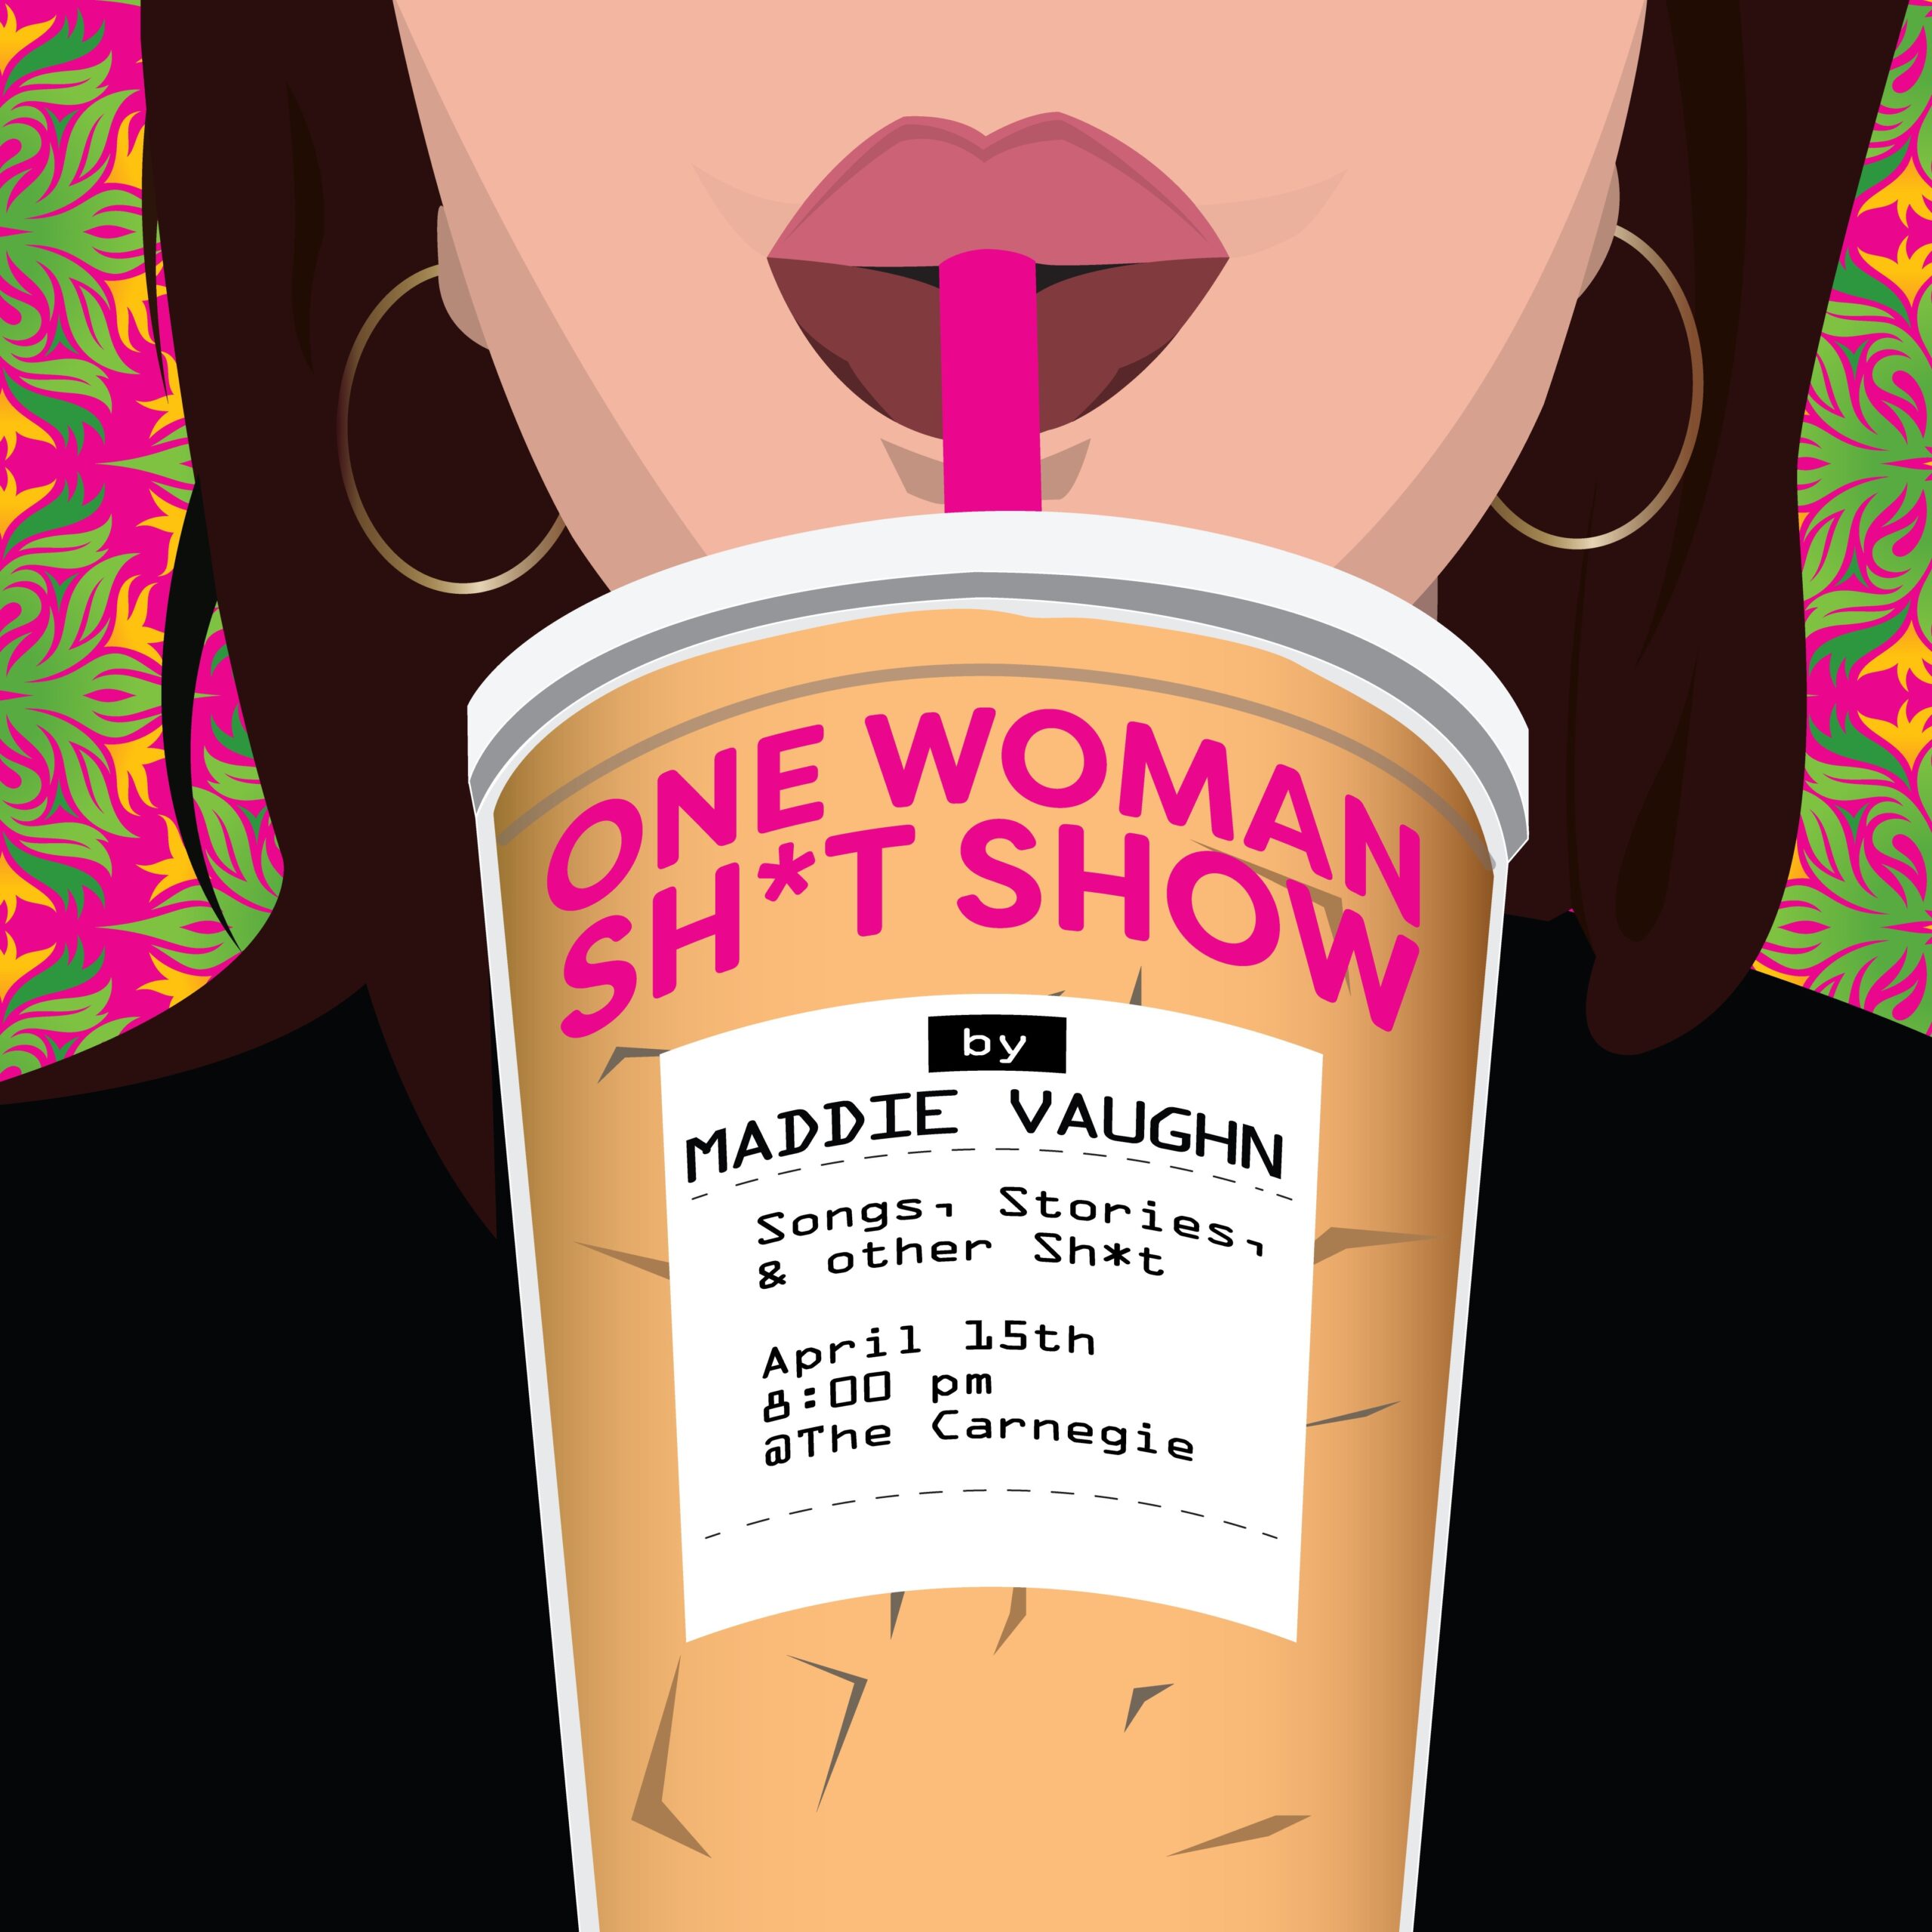 One Woman Sh*t Show